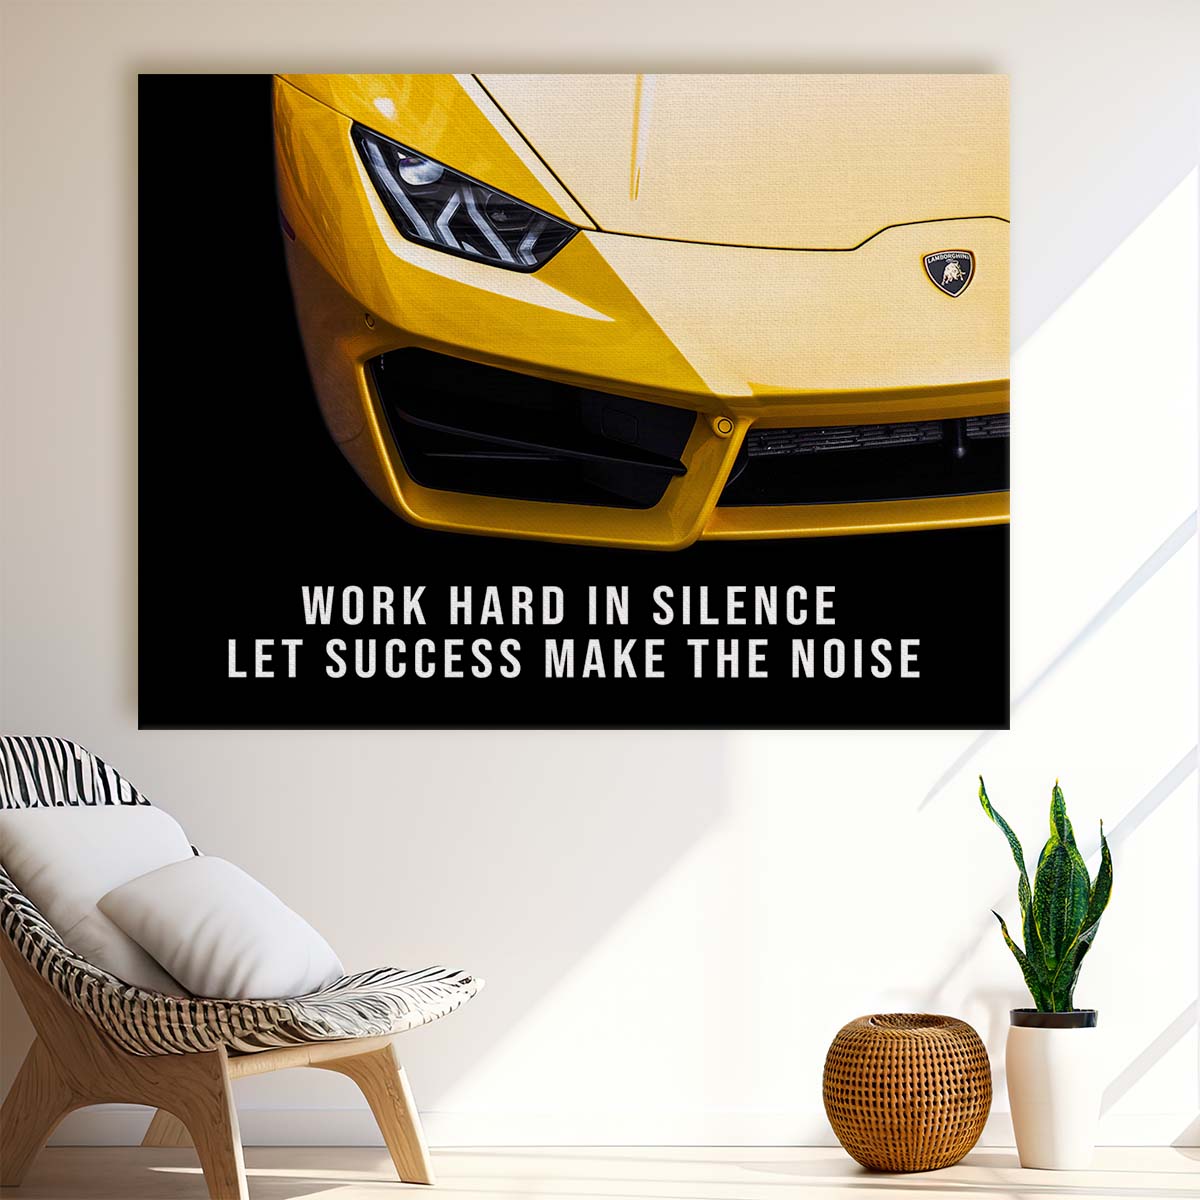 Work Hard In Silence Wall Art by Luxuriance Designs. Made in USA.